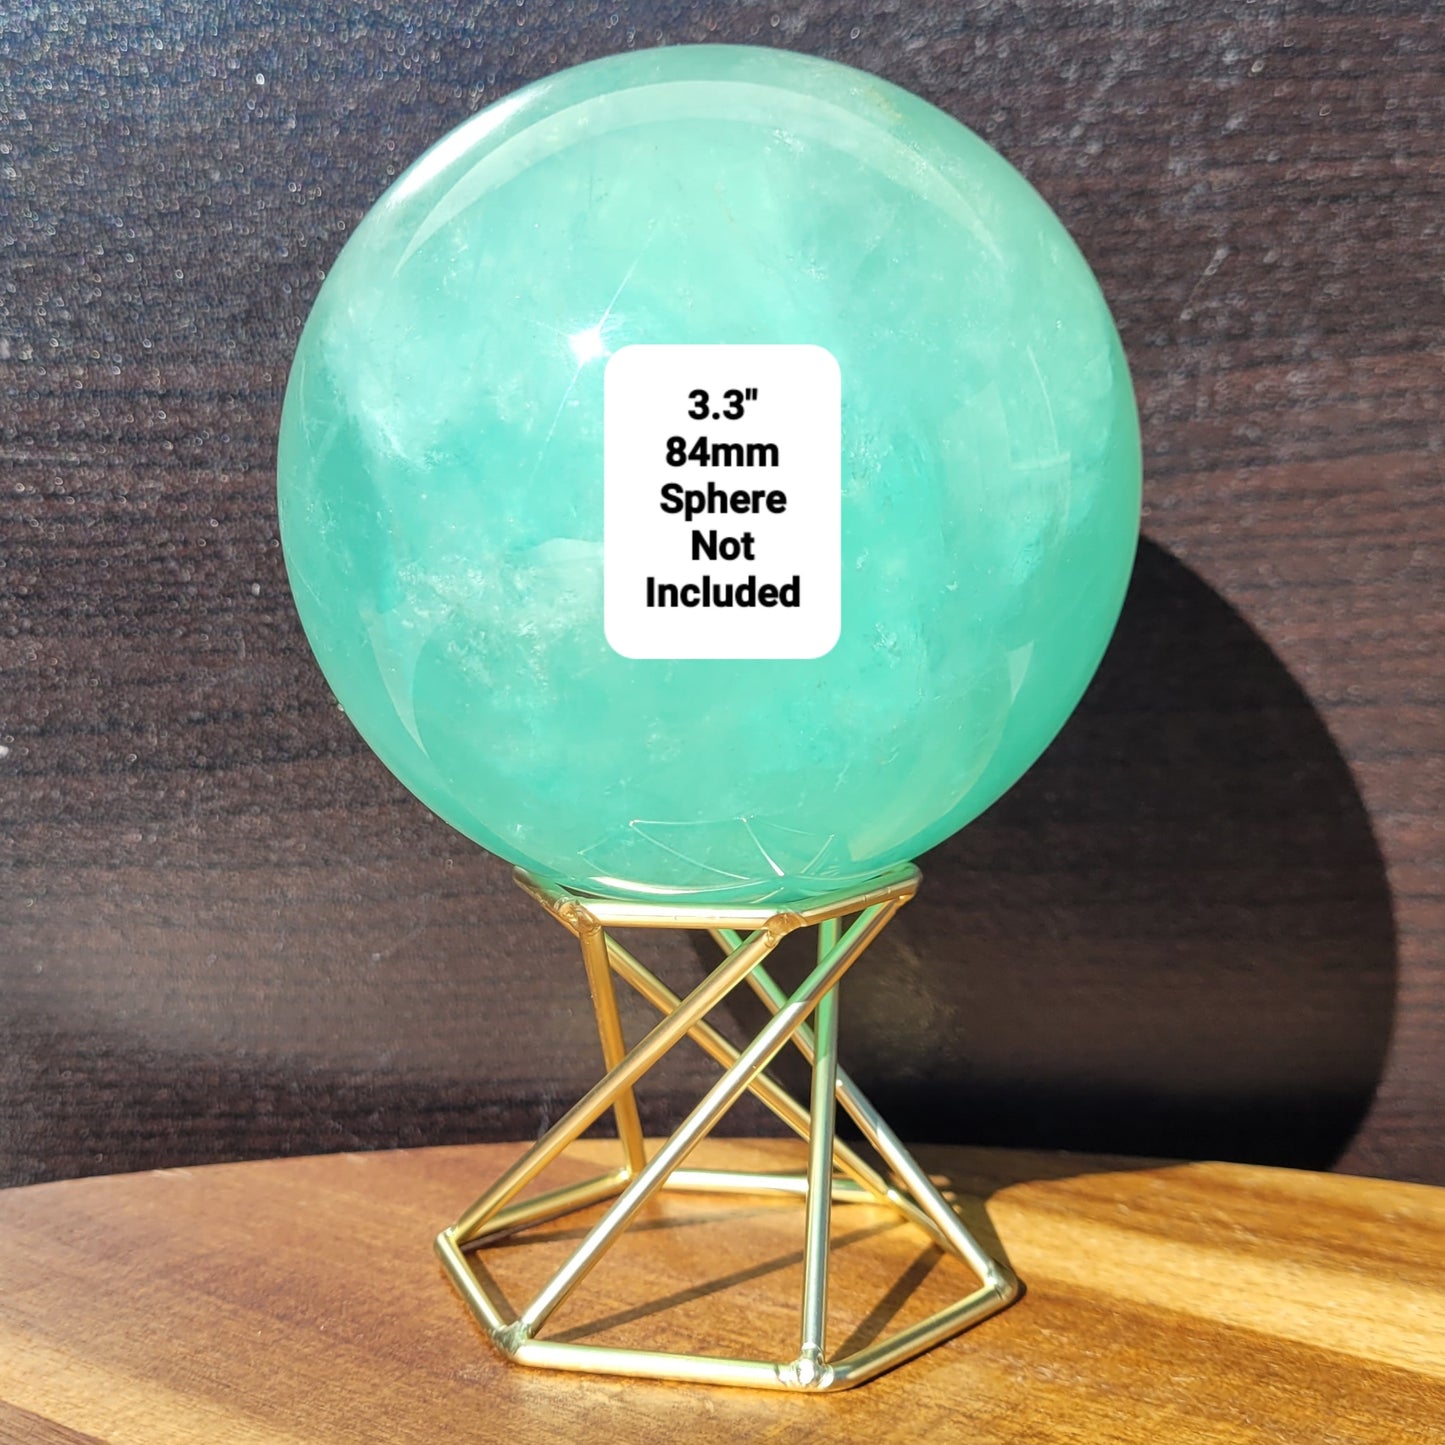 Metal Spiral Sphere Display Stands in Gold or Silver for Balls 1.7" to 4" (43mm to 102mm)